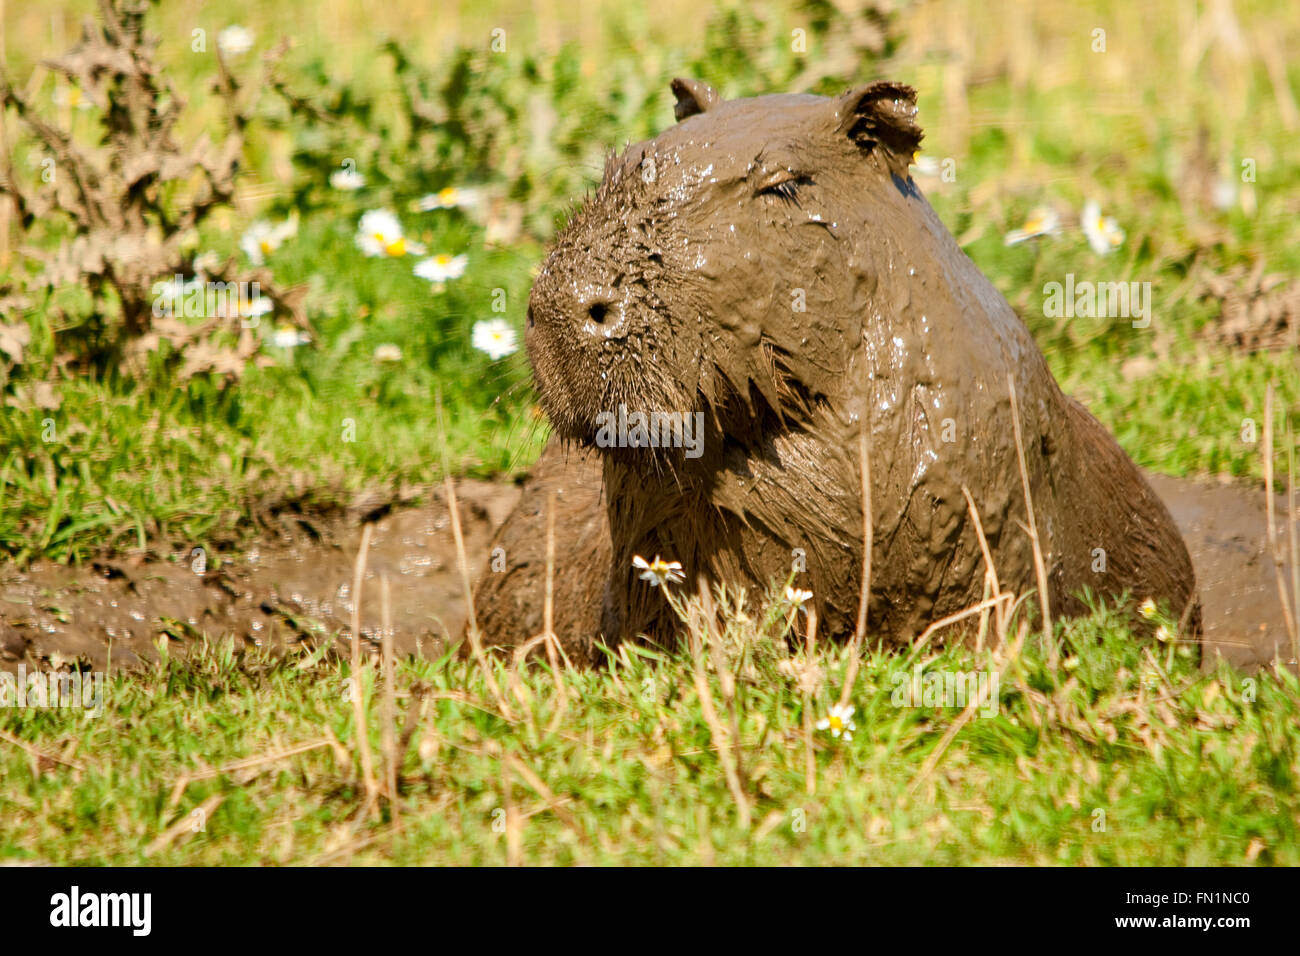 Capybara or hydrochoerus hydrochaeris fully mud covered after wallowing in thick mud resembling a chocolate coating. Whiskers protruding through mud. Stock Photo